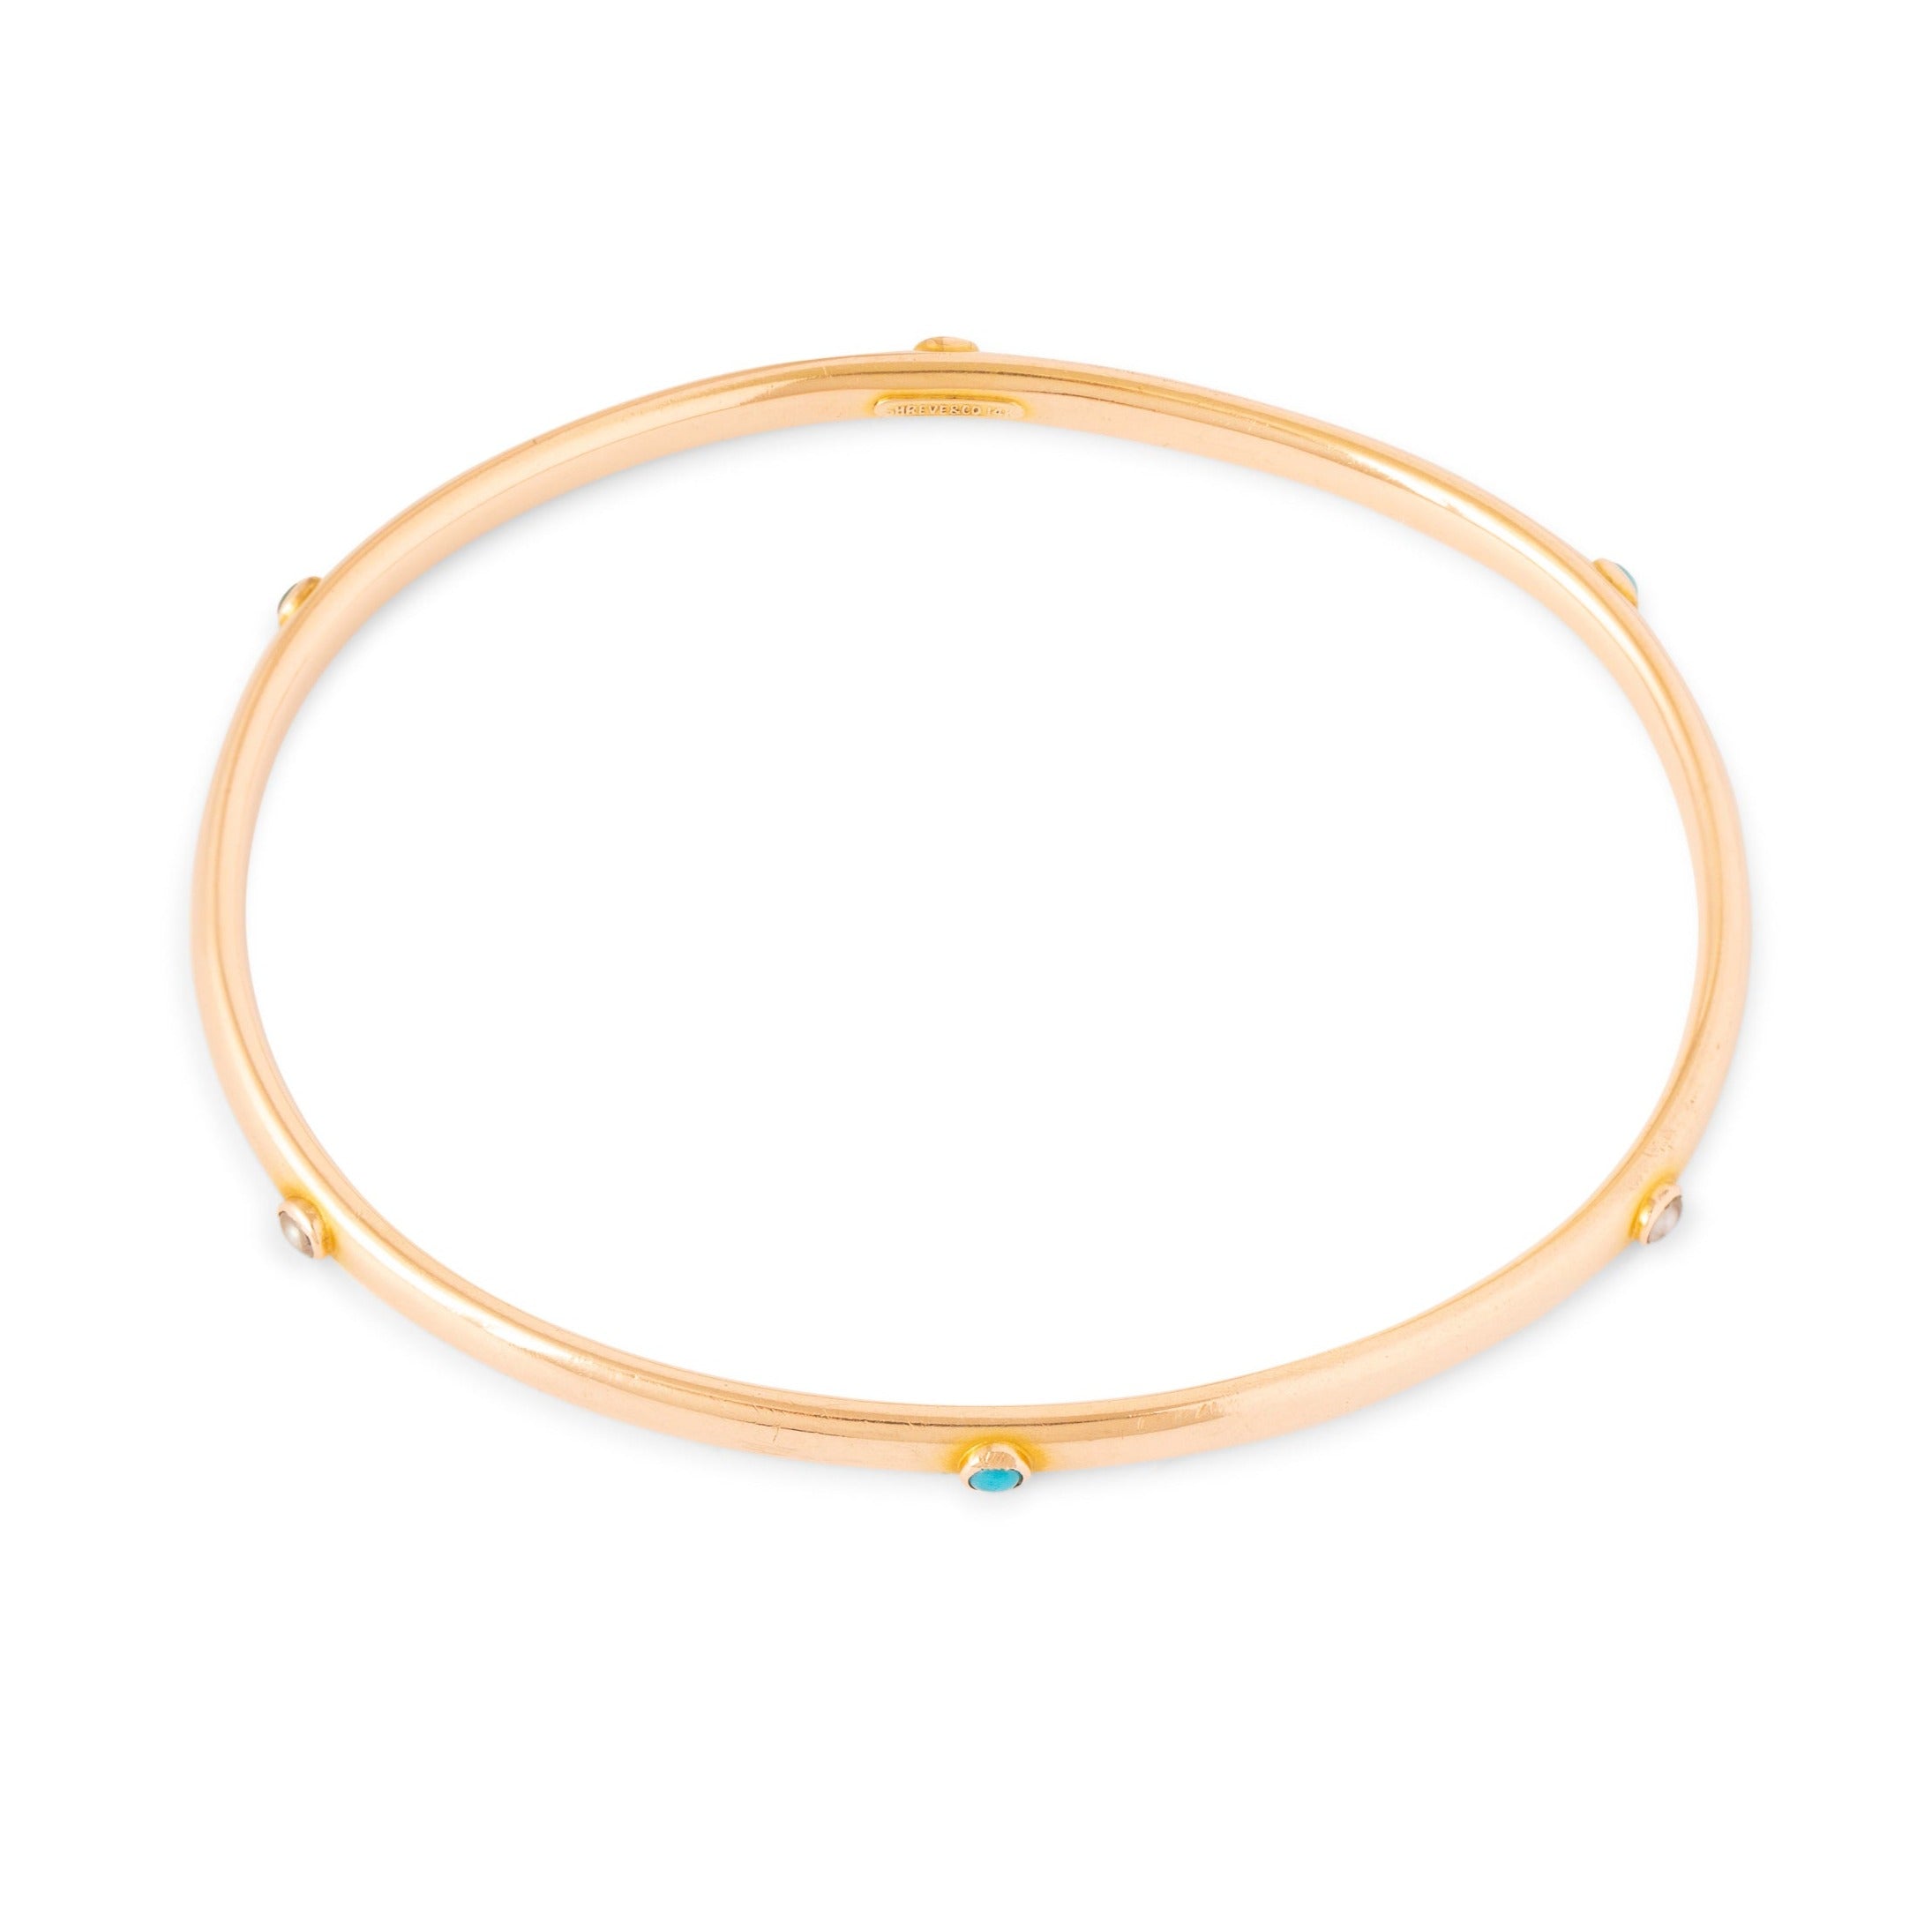 Turquoise and Pearl 14k Gold Bangle Bracelet